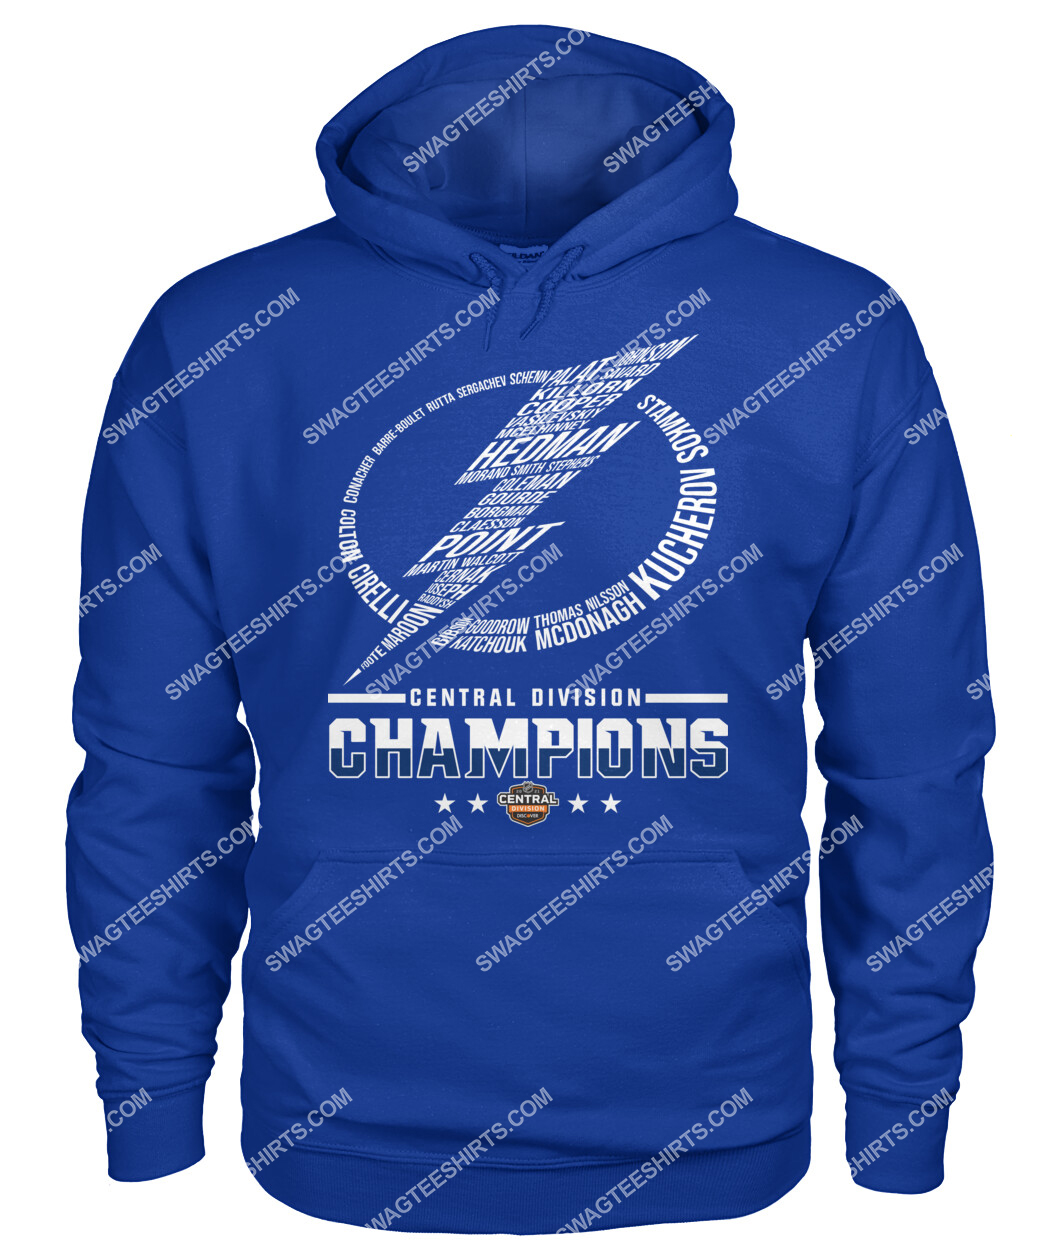 2021 central division champions tampa bay lightning hoodie 1